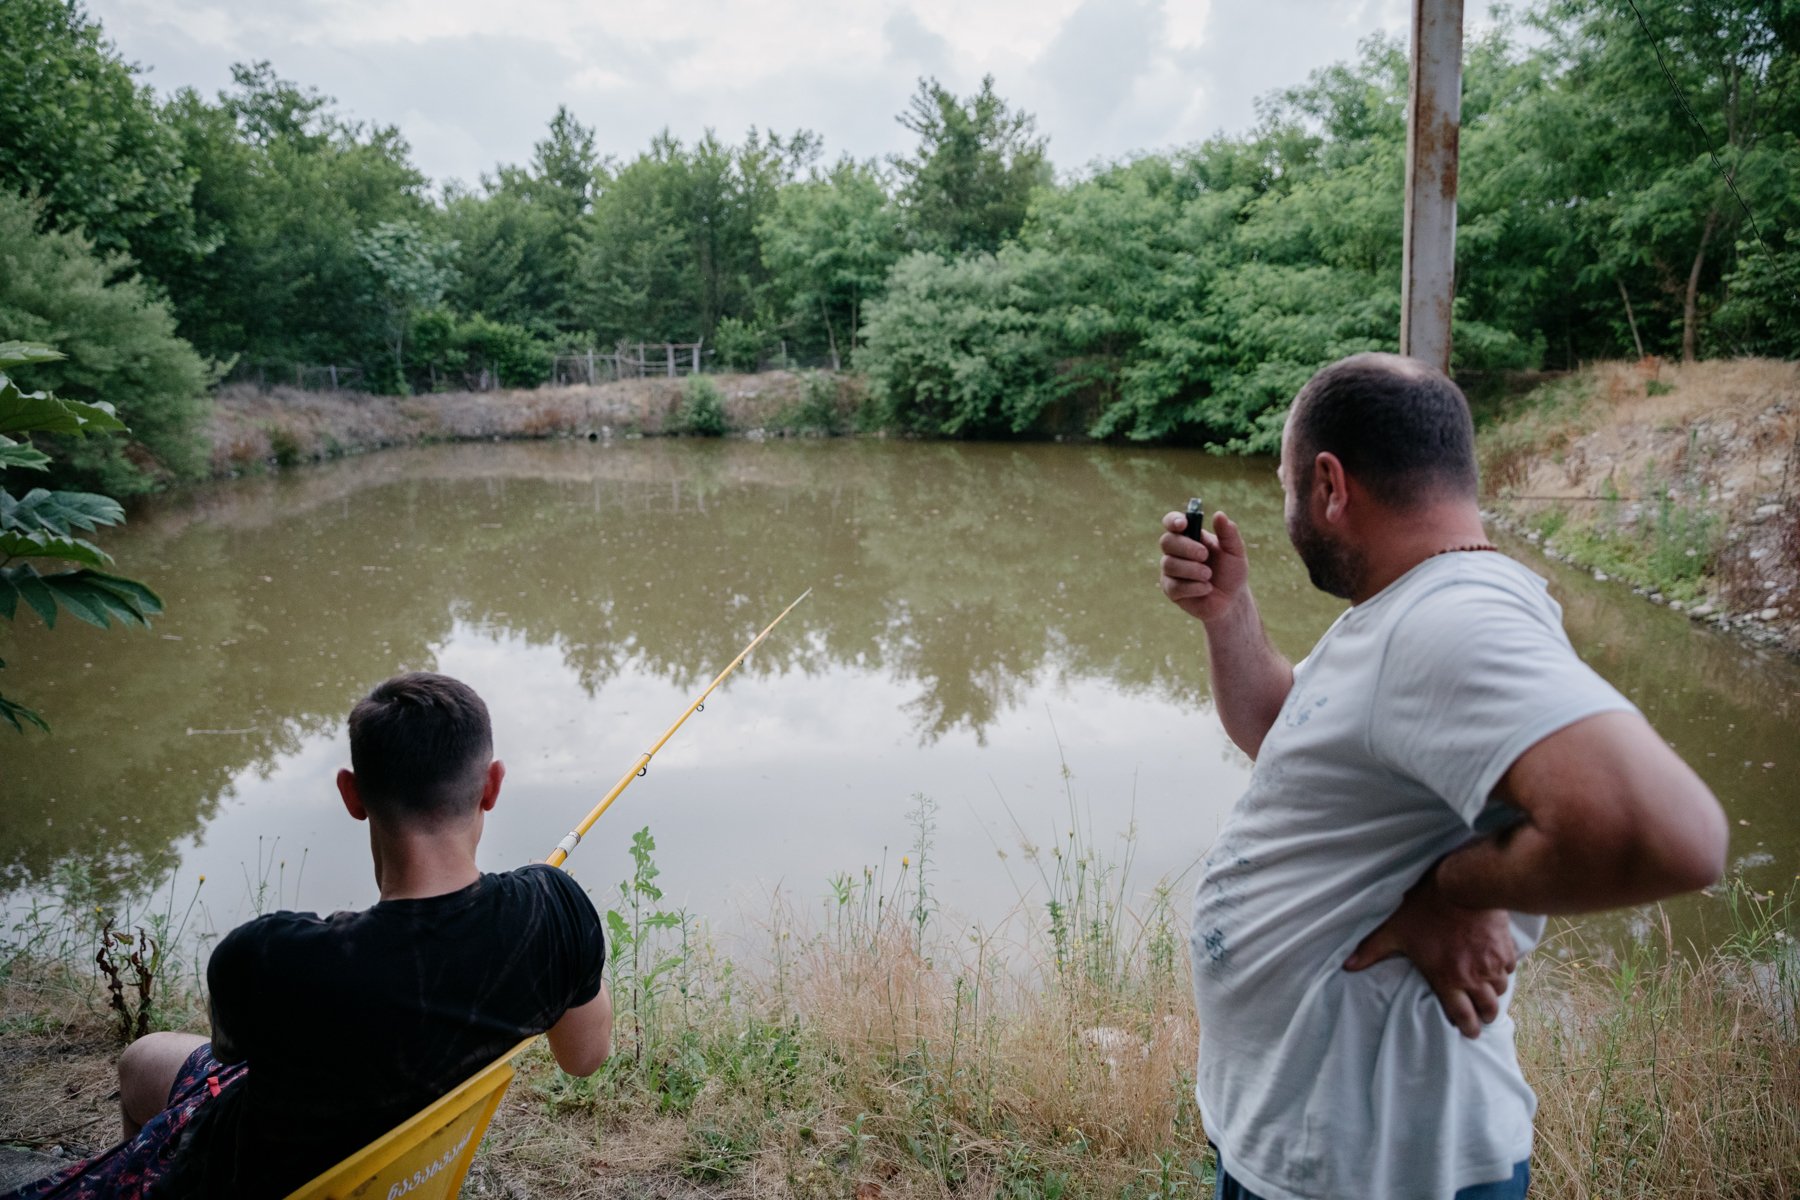  Men fish in a pond that sits next to the occupation line in Khurcha. Nearby is a small bridge that provided a crossing point with Abkhazia until it was closed by Russian forces in March 2017. 